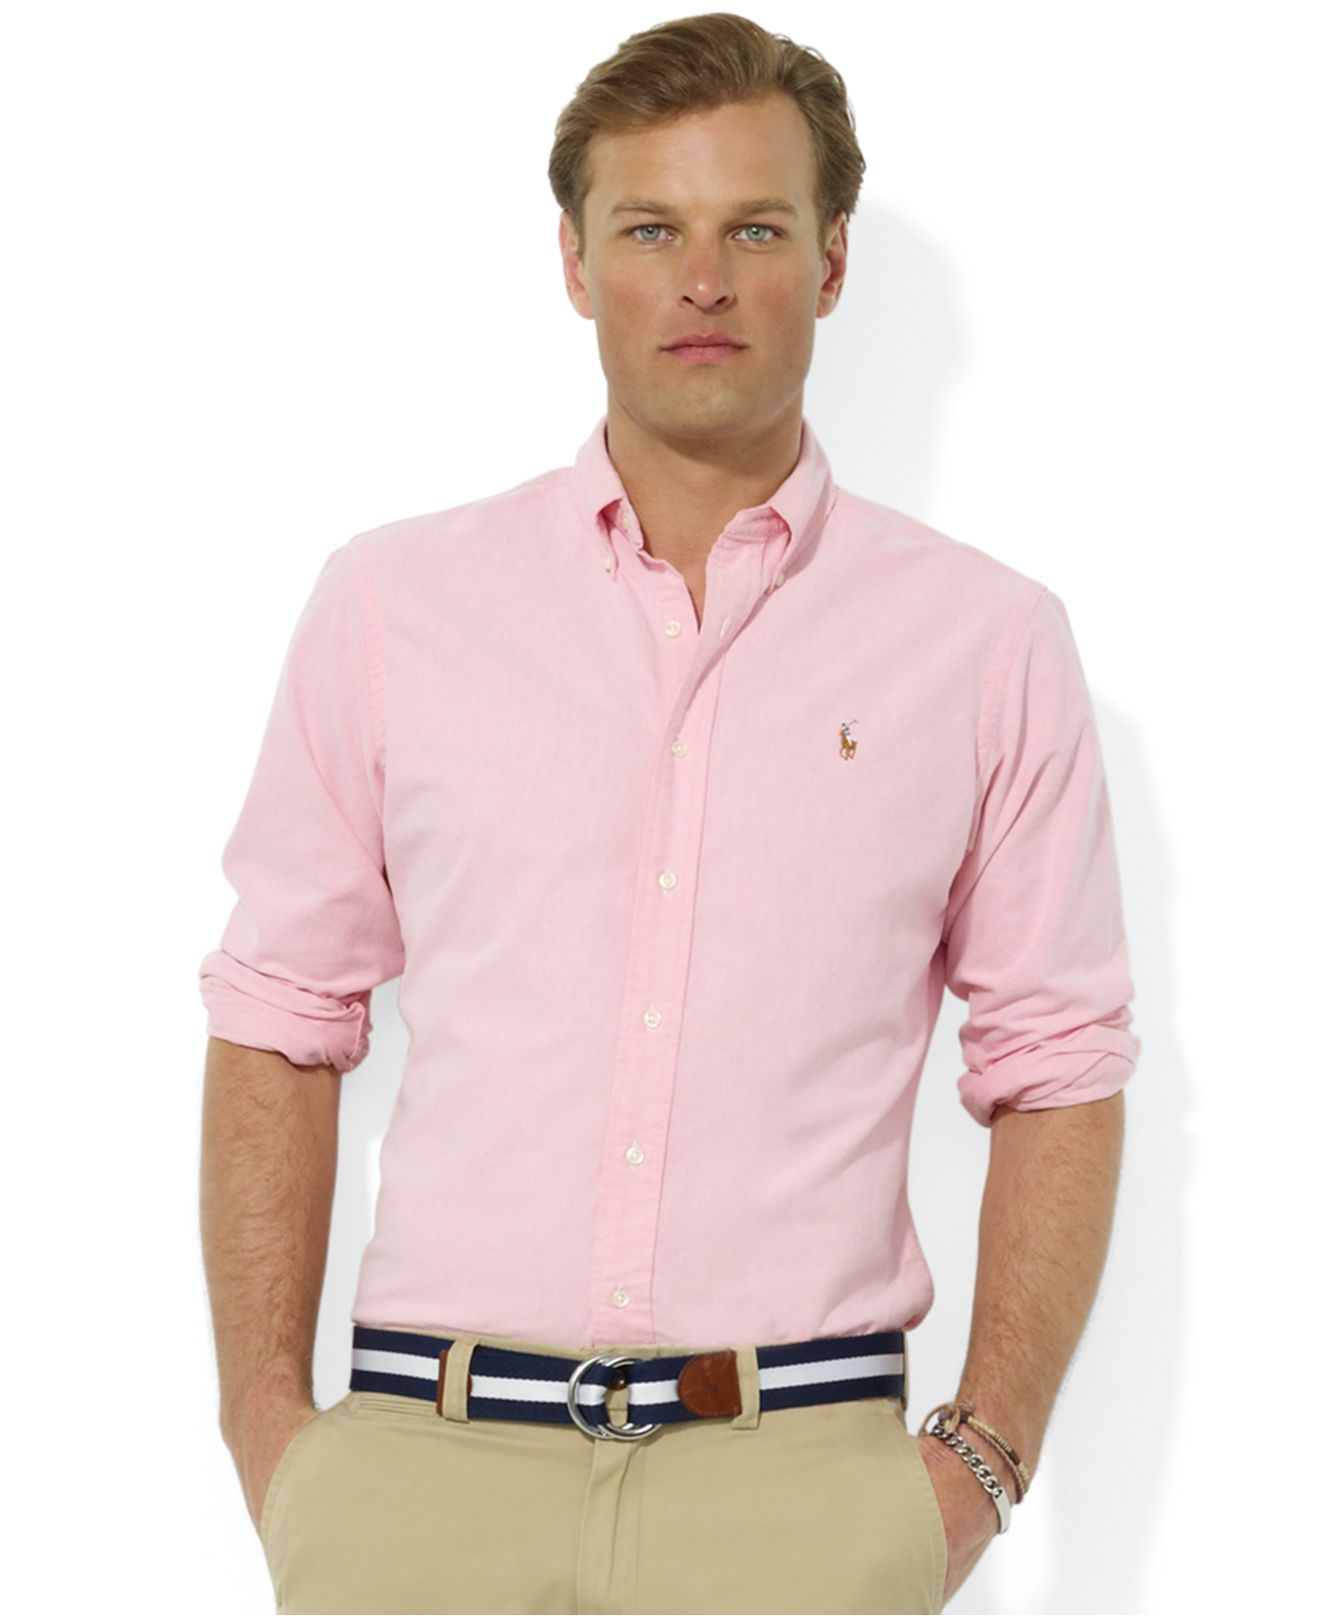 Polo Ralph Lauren Core Classic Fit Oxford Shirt in Pink for Men - Lyst